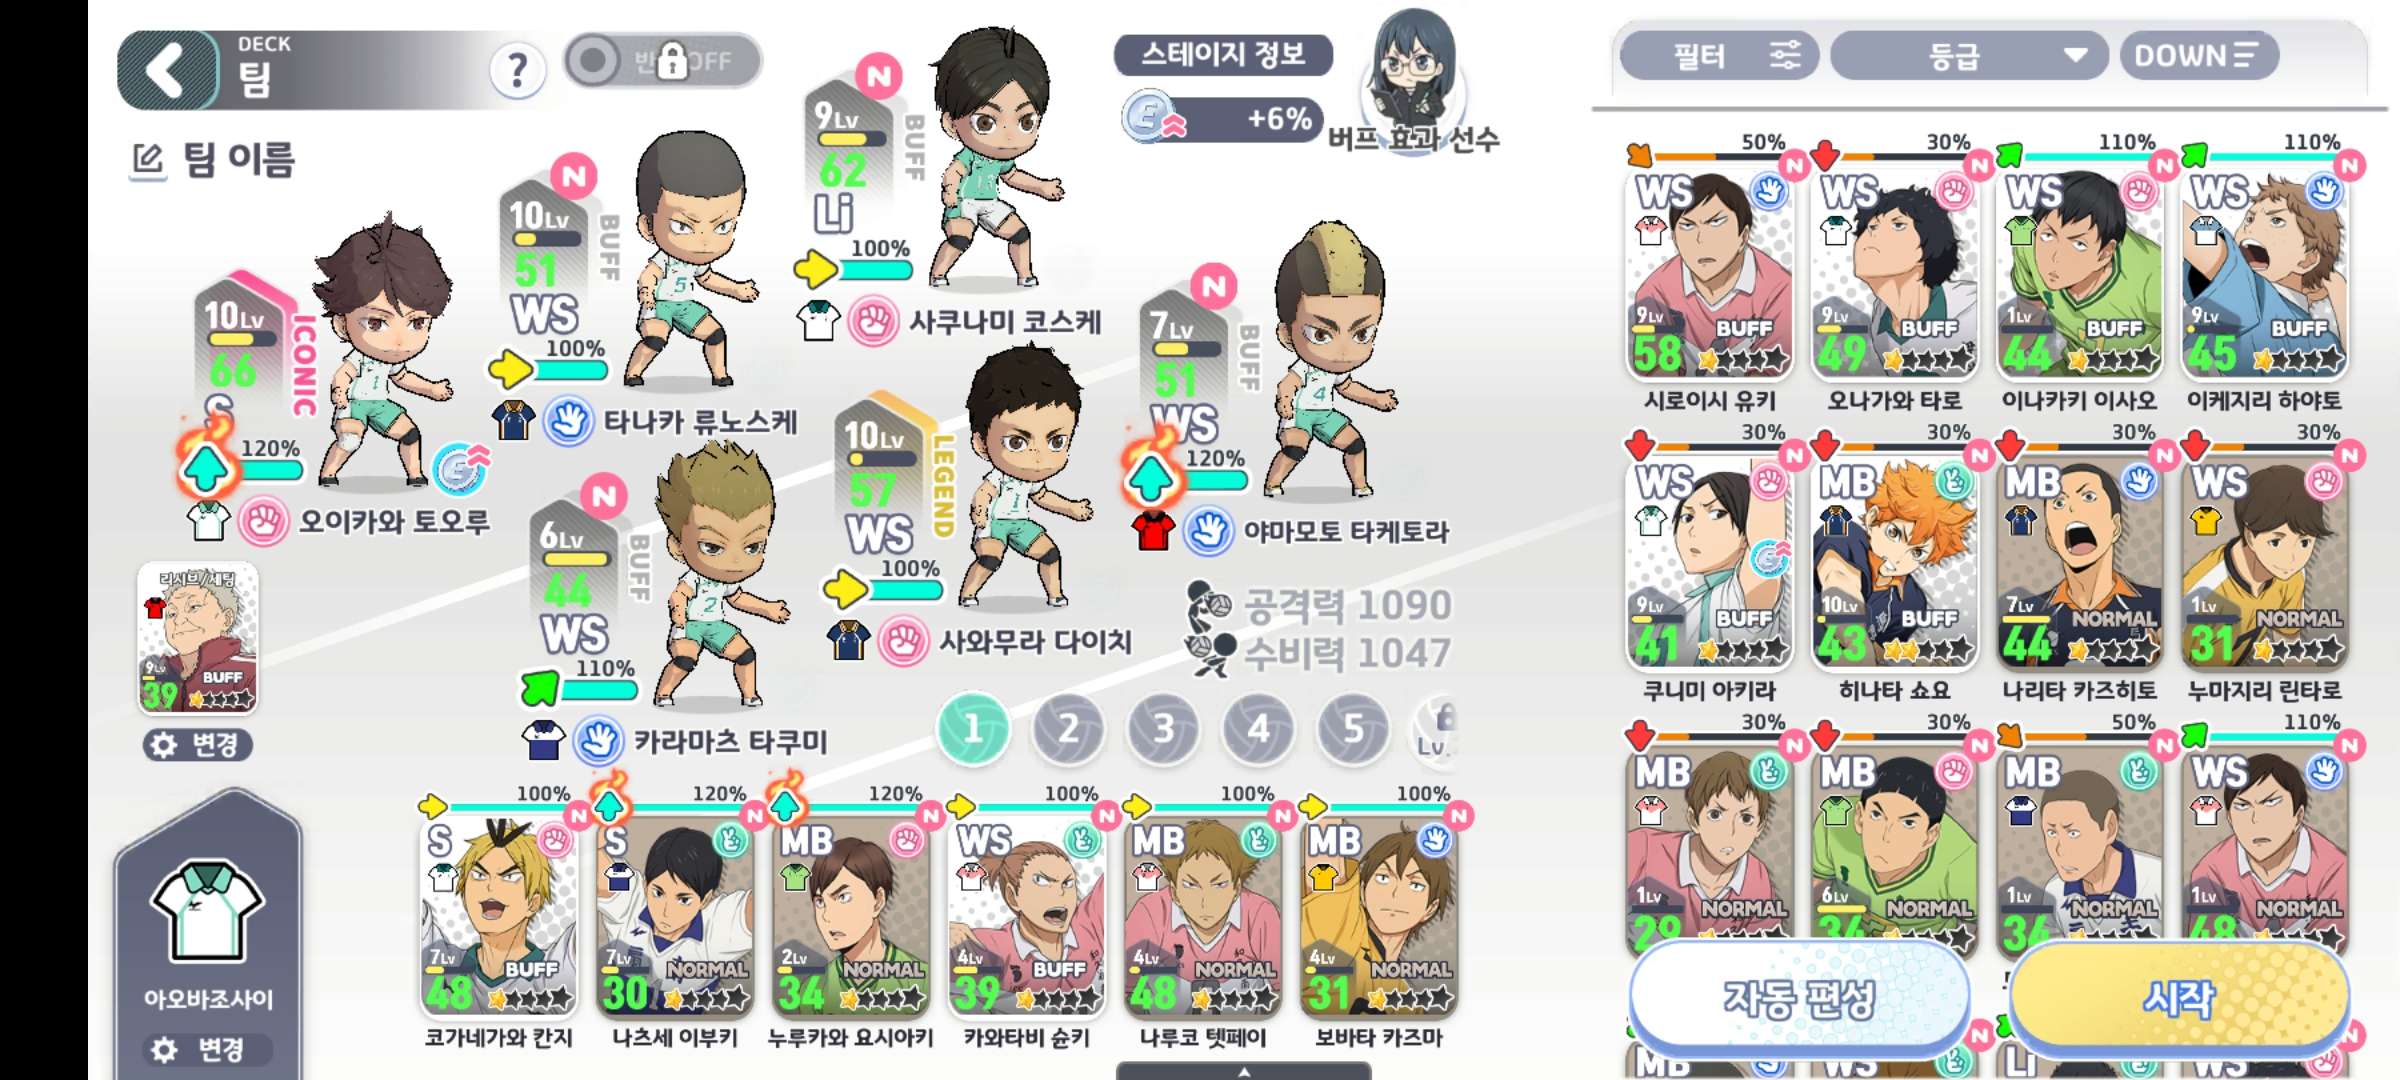 Haikyu!! Touch The Dream - Beginner Tips and Reroll Guide - QooApp